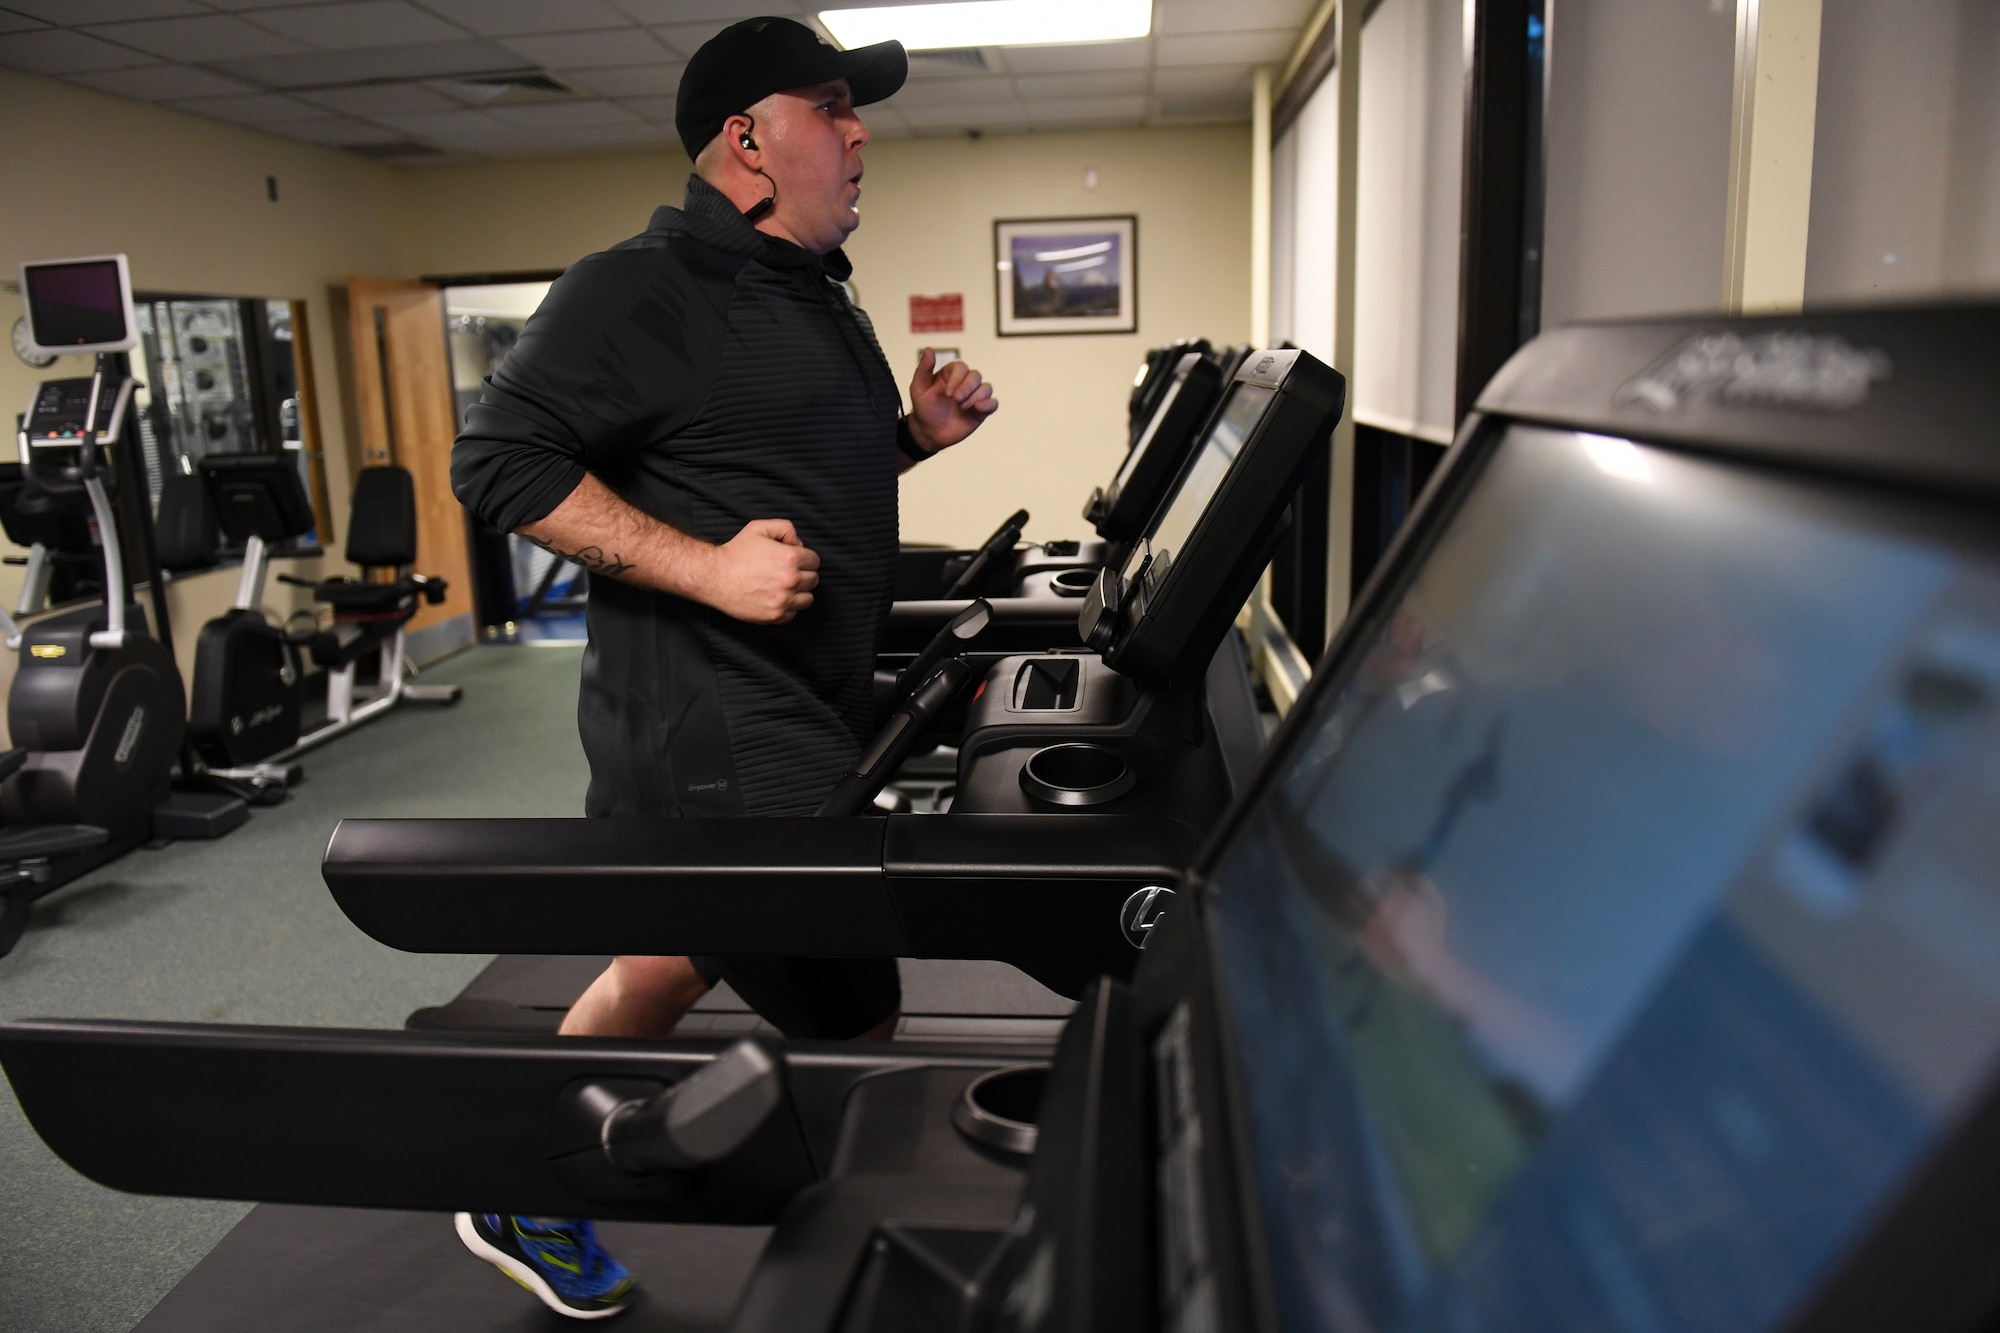 Staff Sgt. Michael Taylor, response member with the 911th Security Forces Squadron, runs on a treadmill at Pittsburgh IAP ARS, Pennsylvania, December 11, 2018. The 911th Airlift Wing Fitness Center replaced their older treadmills with brand new ones at the end of November. (U.S. Air Force photo by Joshua J. Seybert)